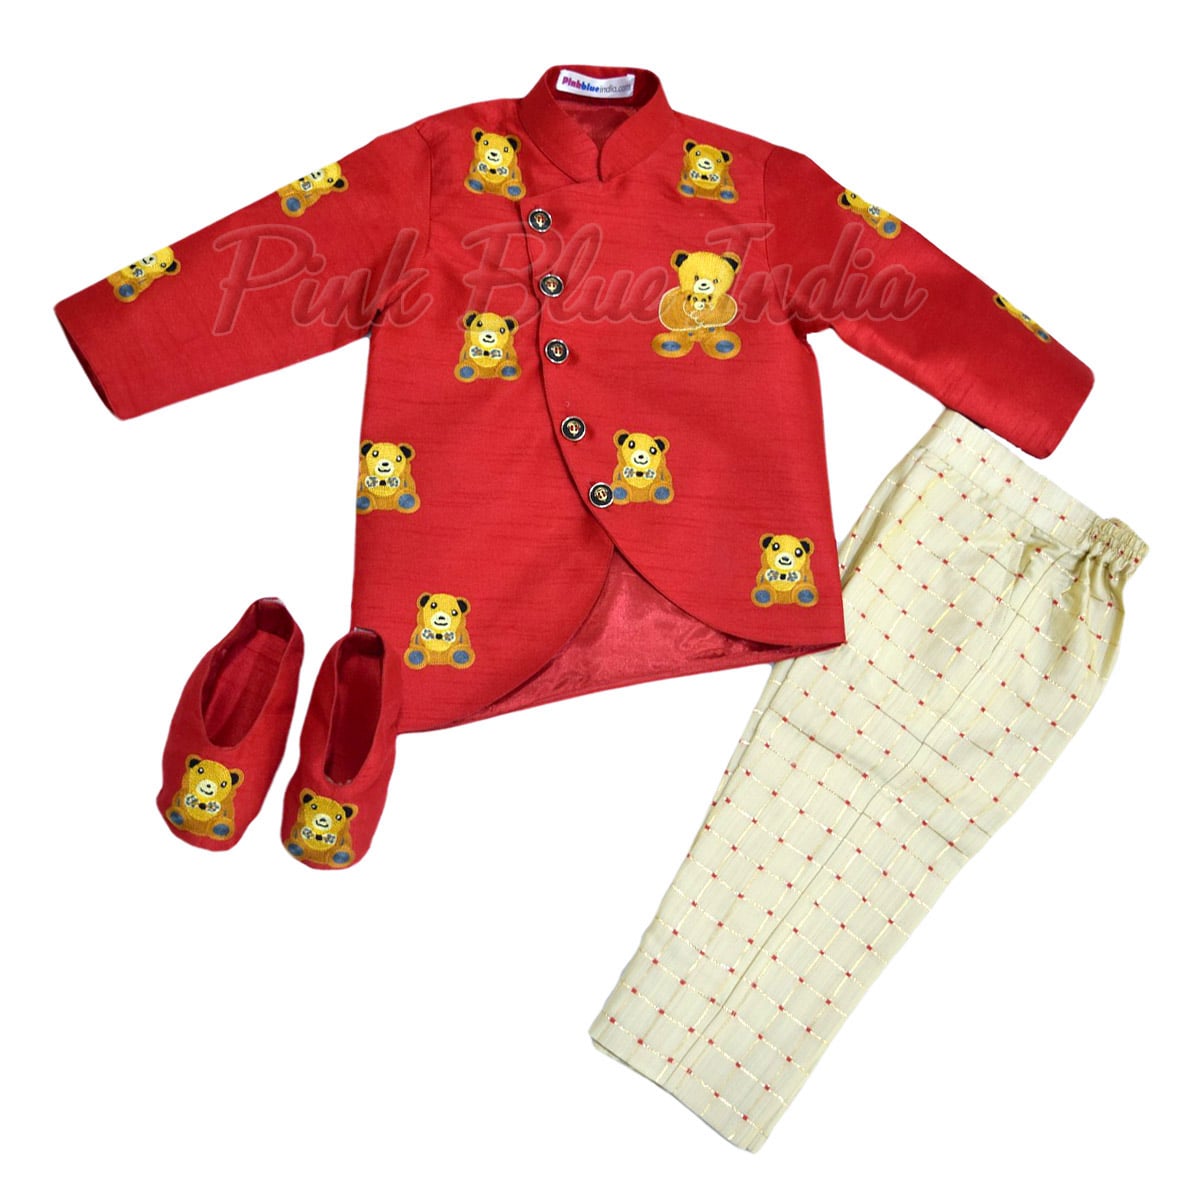 Teddy Bear Boy Birthday Party Theme Outfit Online India